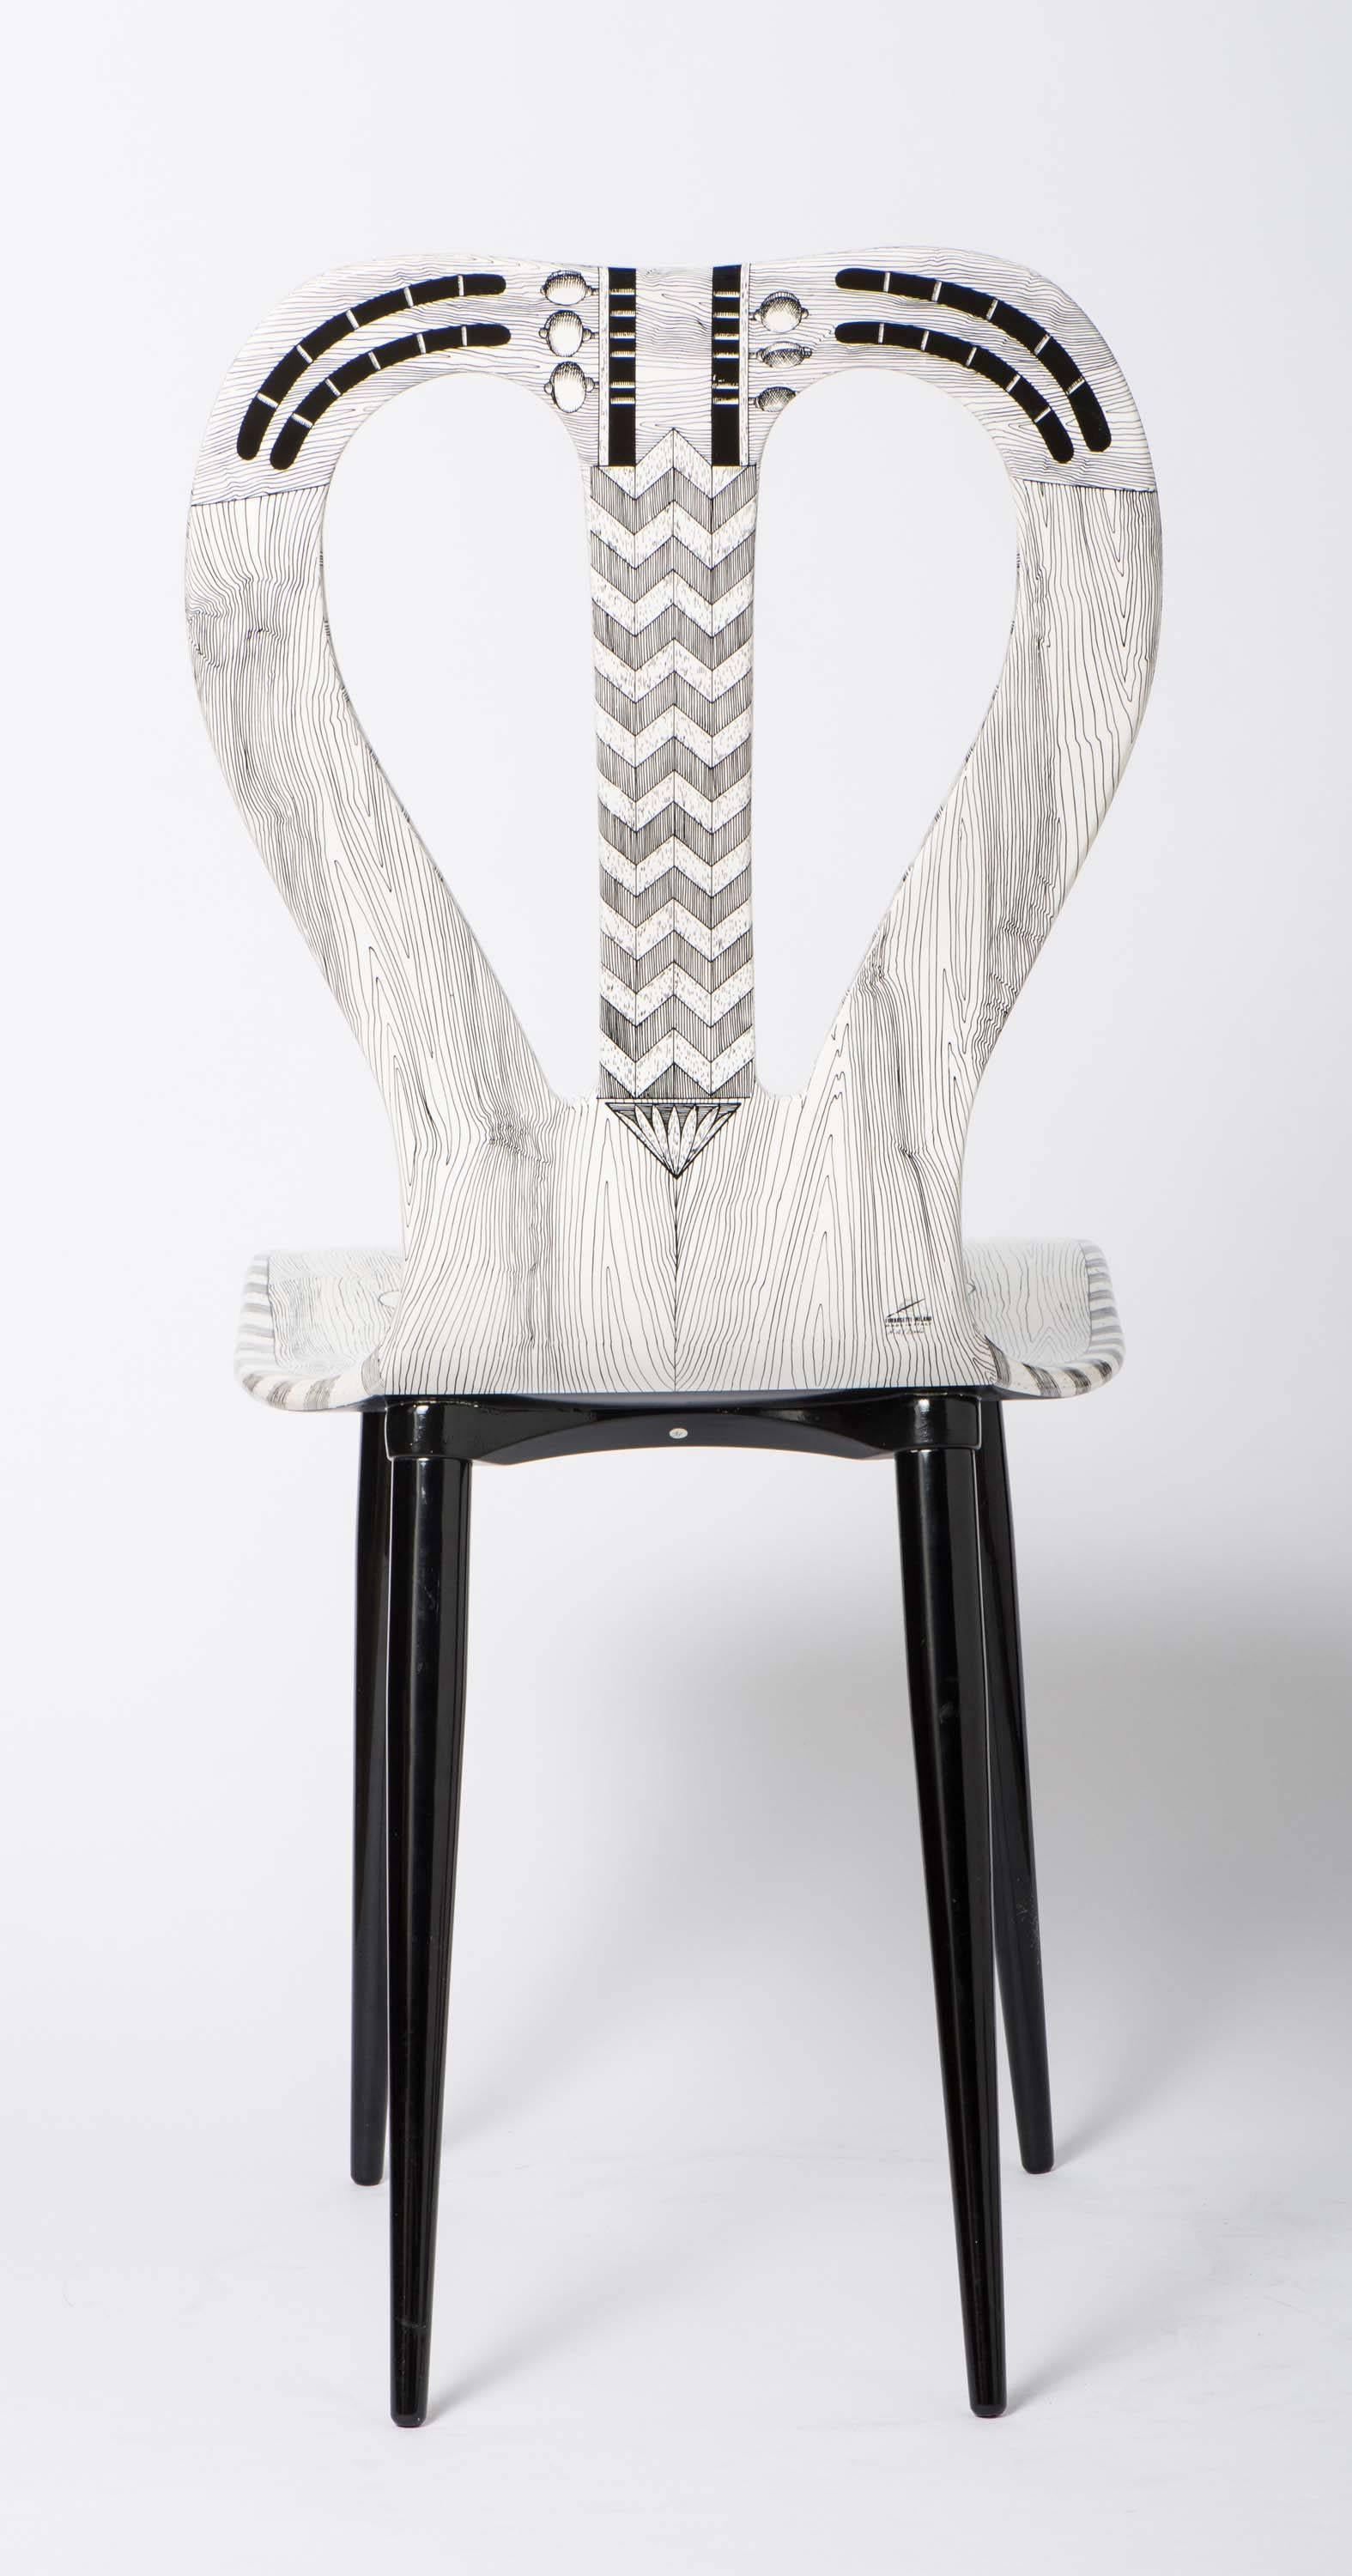 Contemporary Chair by Atelier Fornasetti